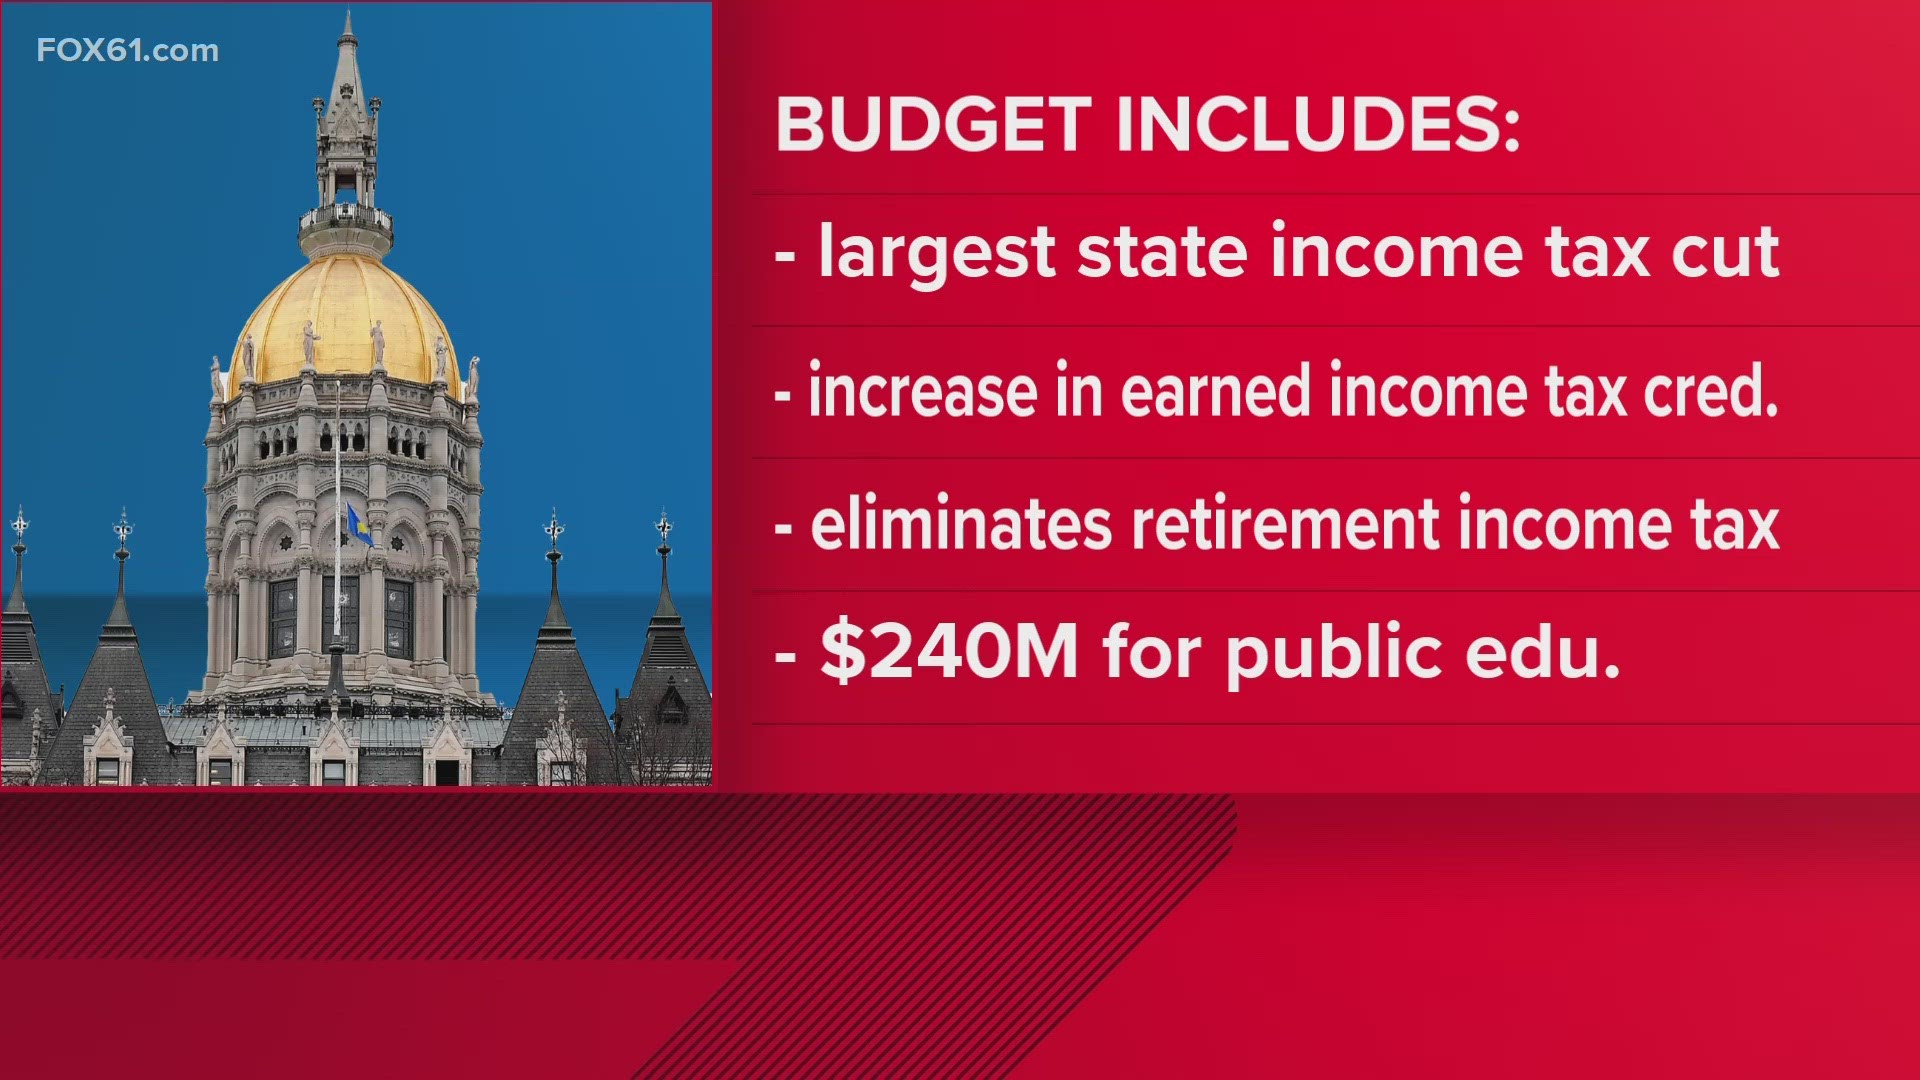 First proposed by Democratic Gov. Ned Lamont, the planned tax reduction is predicted to benefit approximately 1.1 million of the state’s 1.7 million tax filers.